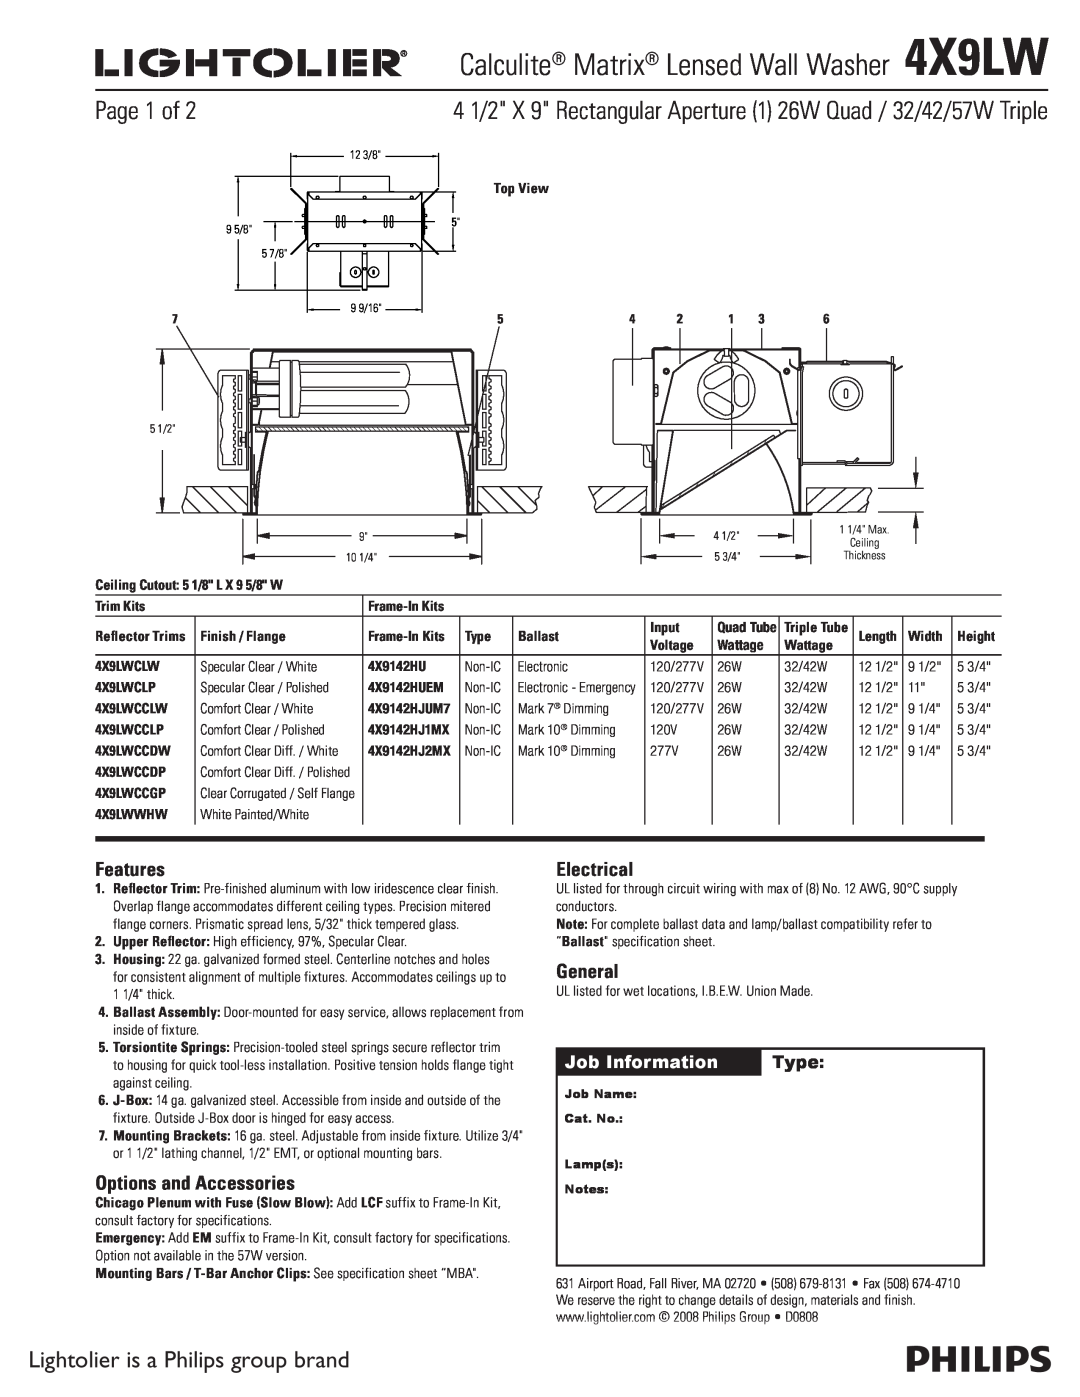 Lightolier specifications Calculite Matrix Lensed Wall Washer 4X9LW, Page 1 of, Lightolier is a Philips group brand 